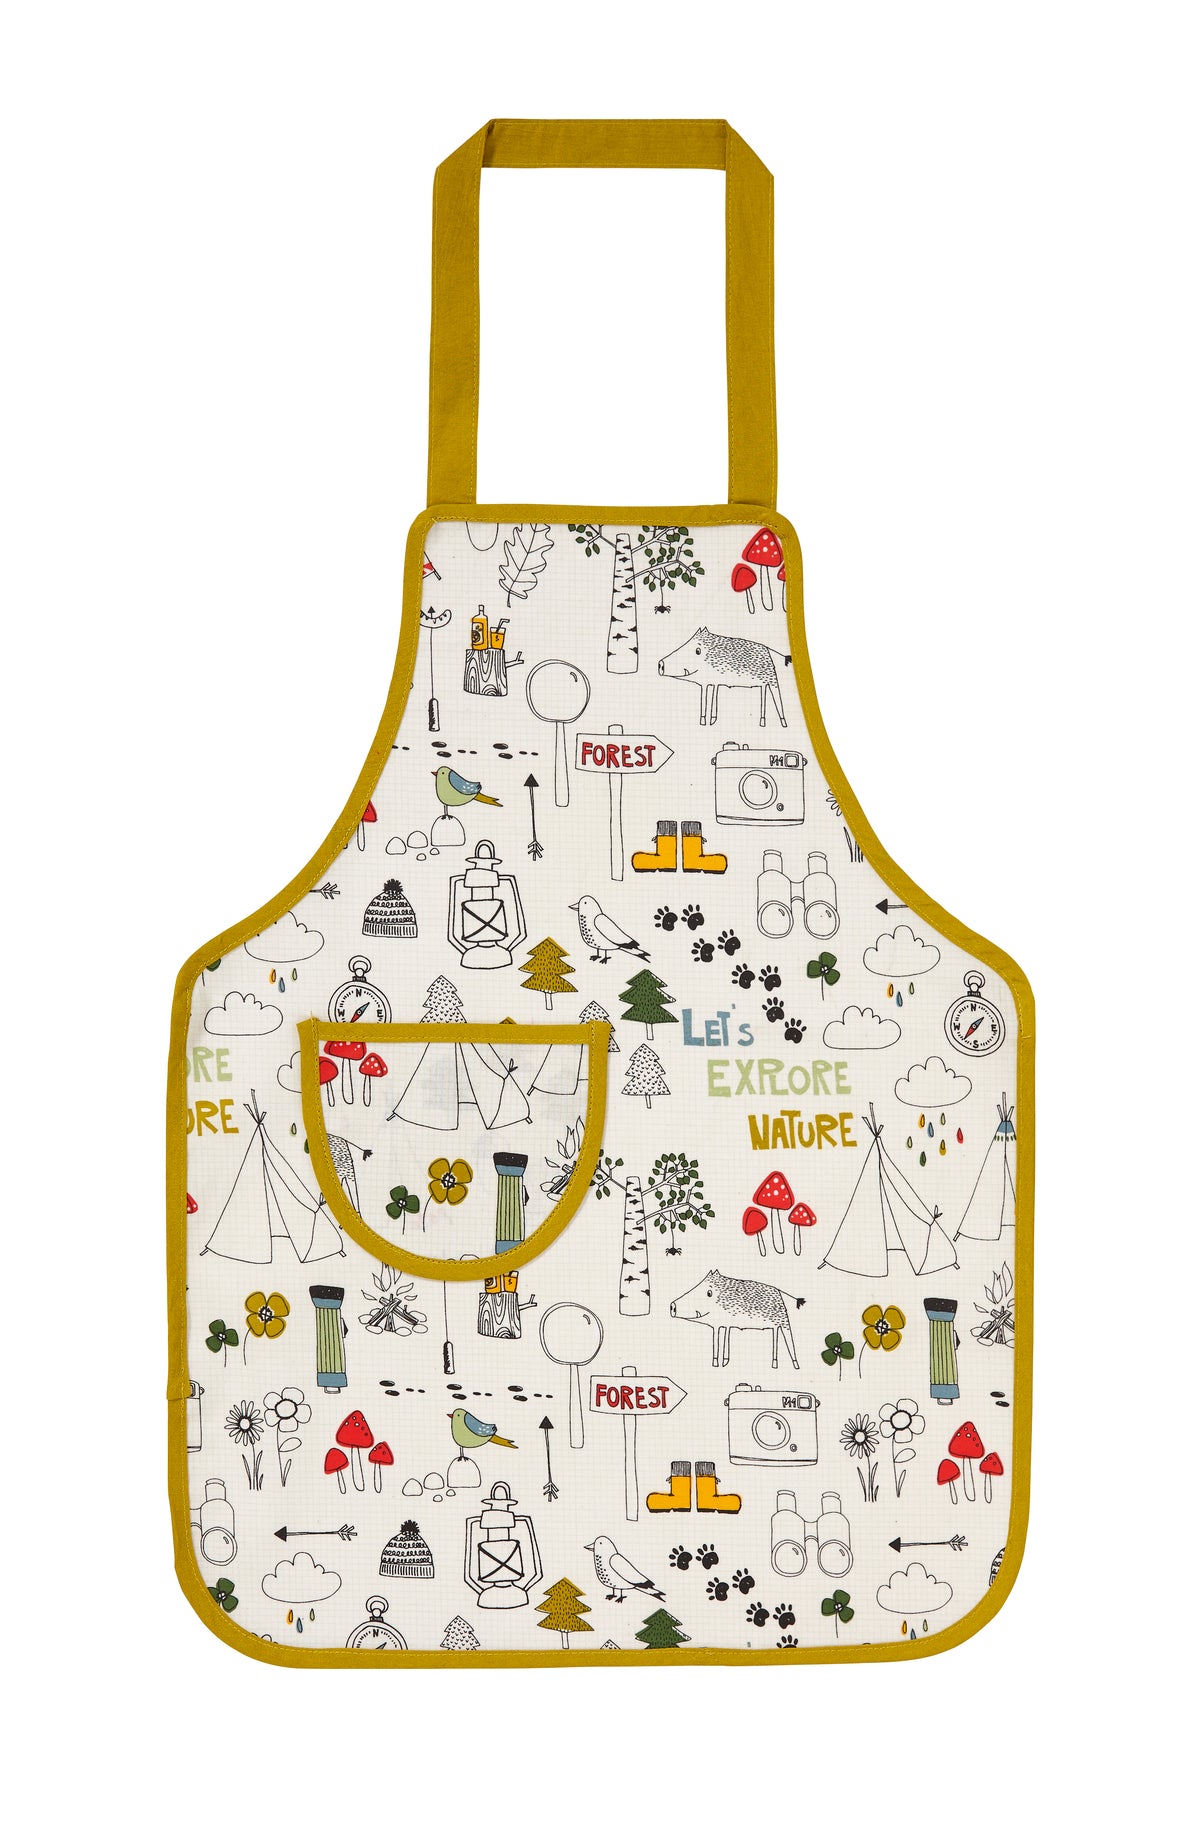 Let's Explore Nature Childs Apron - Ulster Weaver